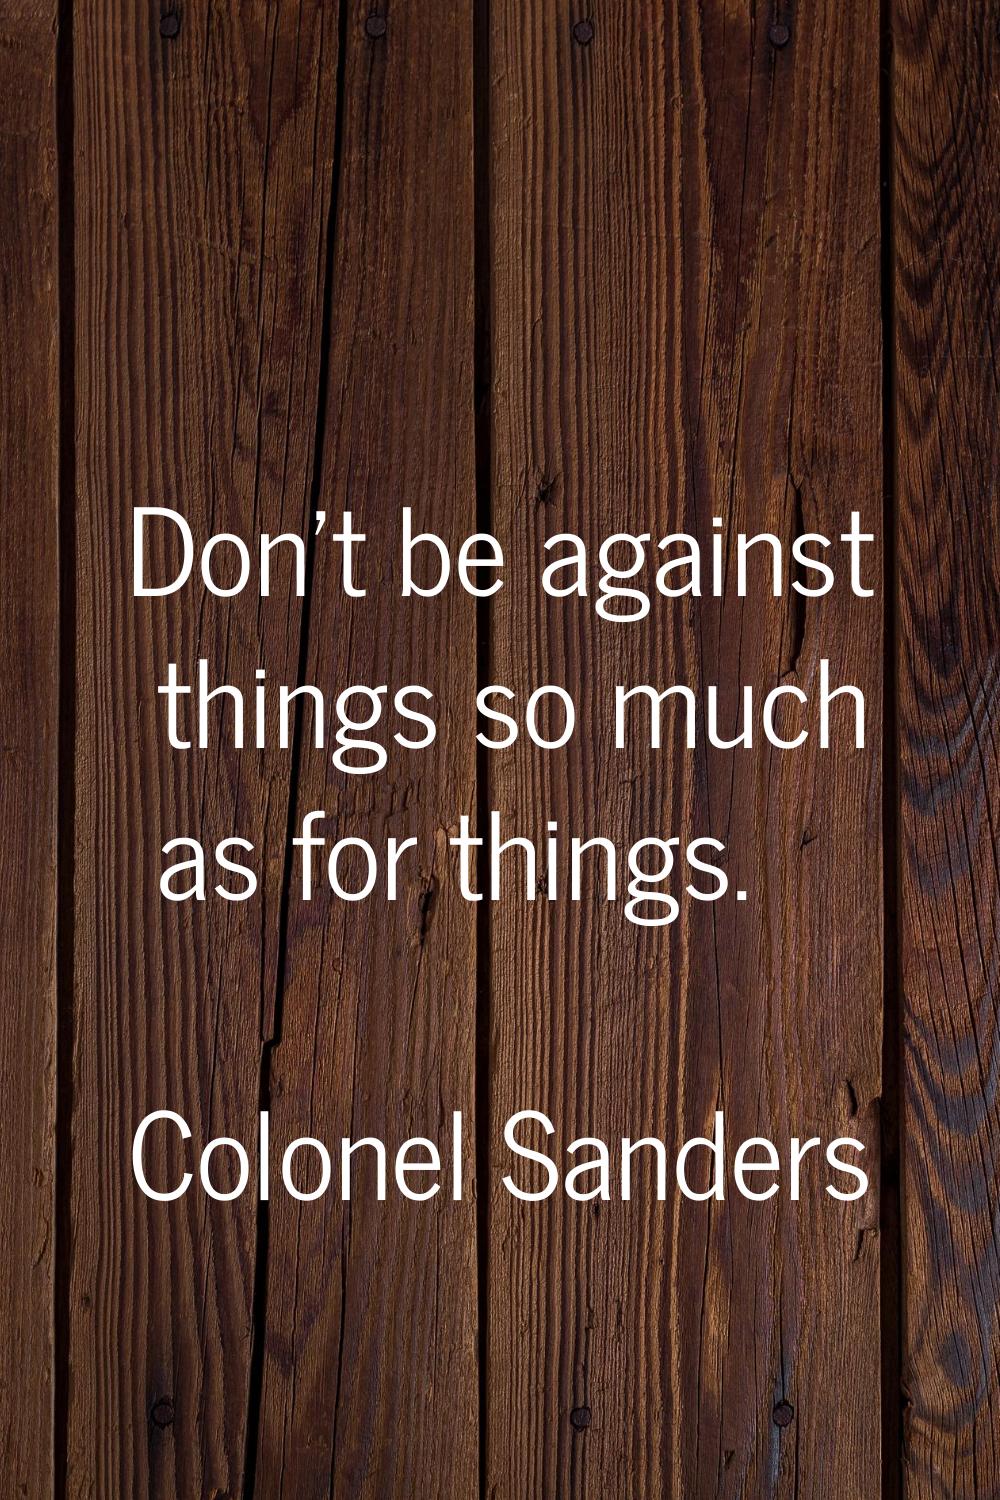 Don't be against things so much as for things.